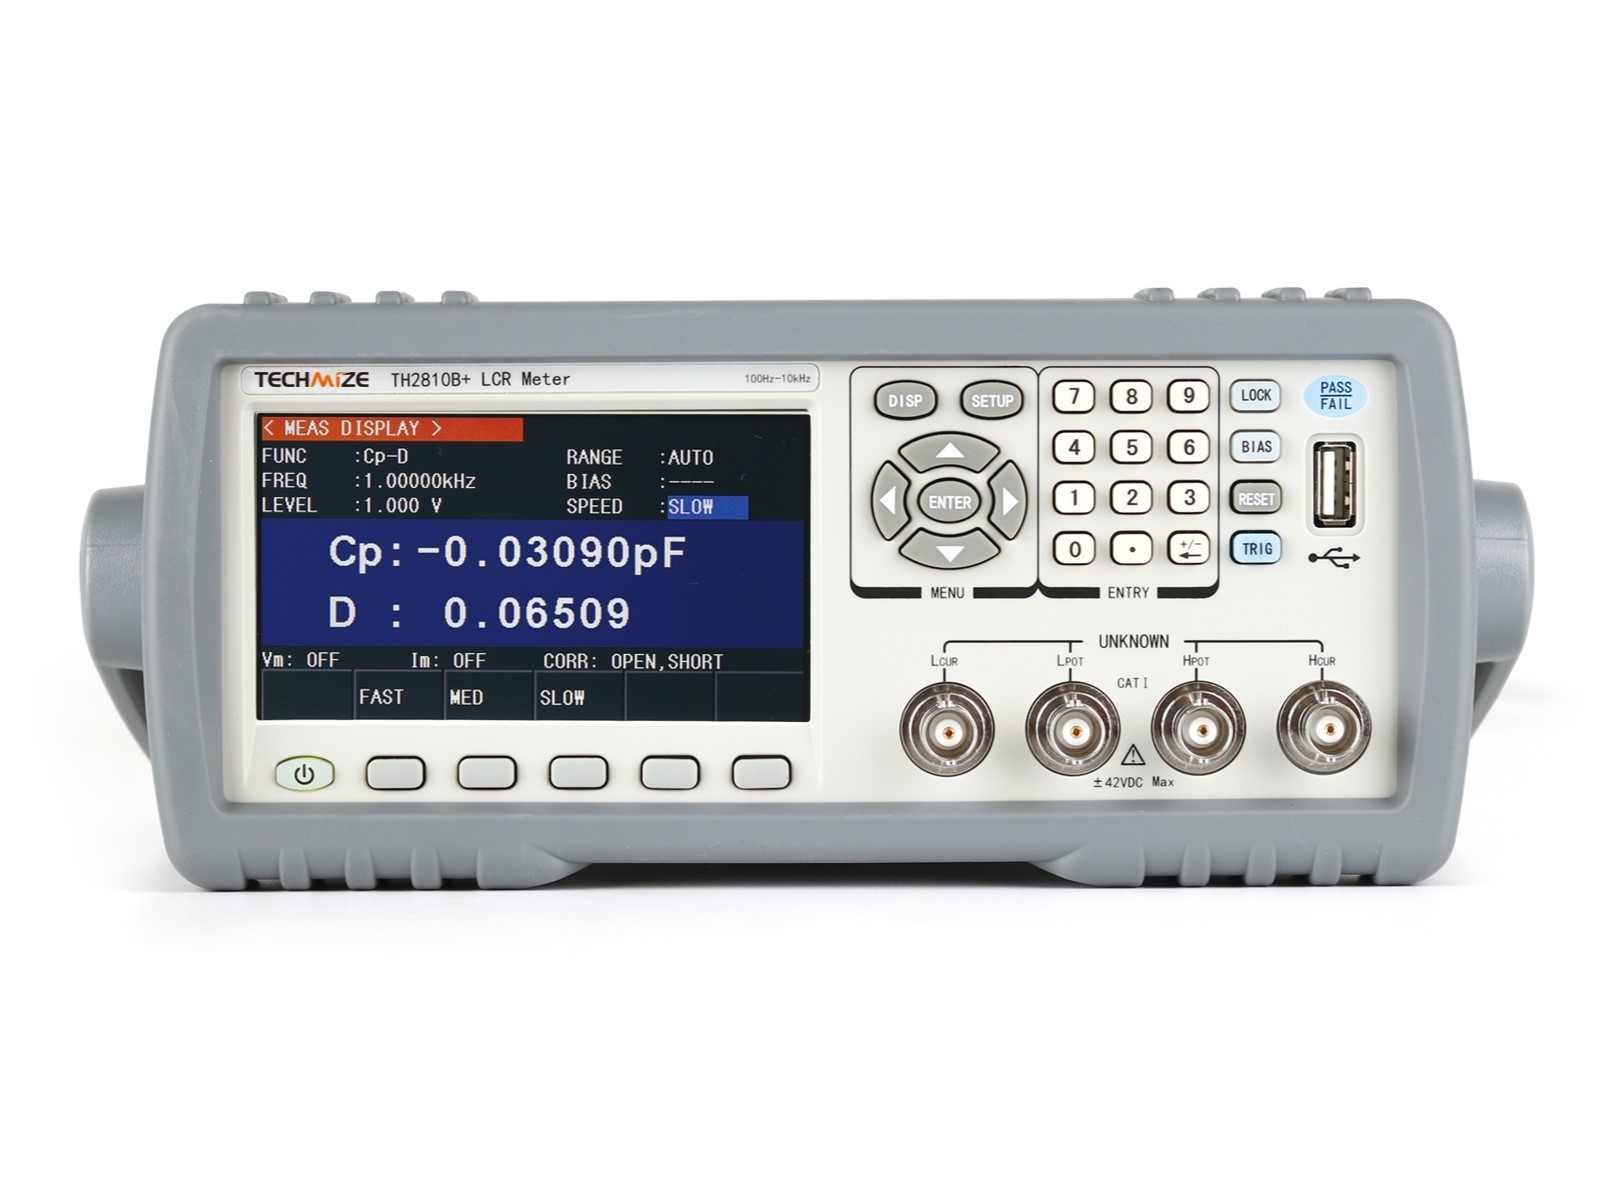 New Video for LCR meter TH2810B+ is here.